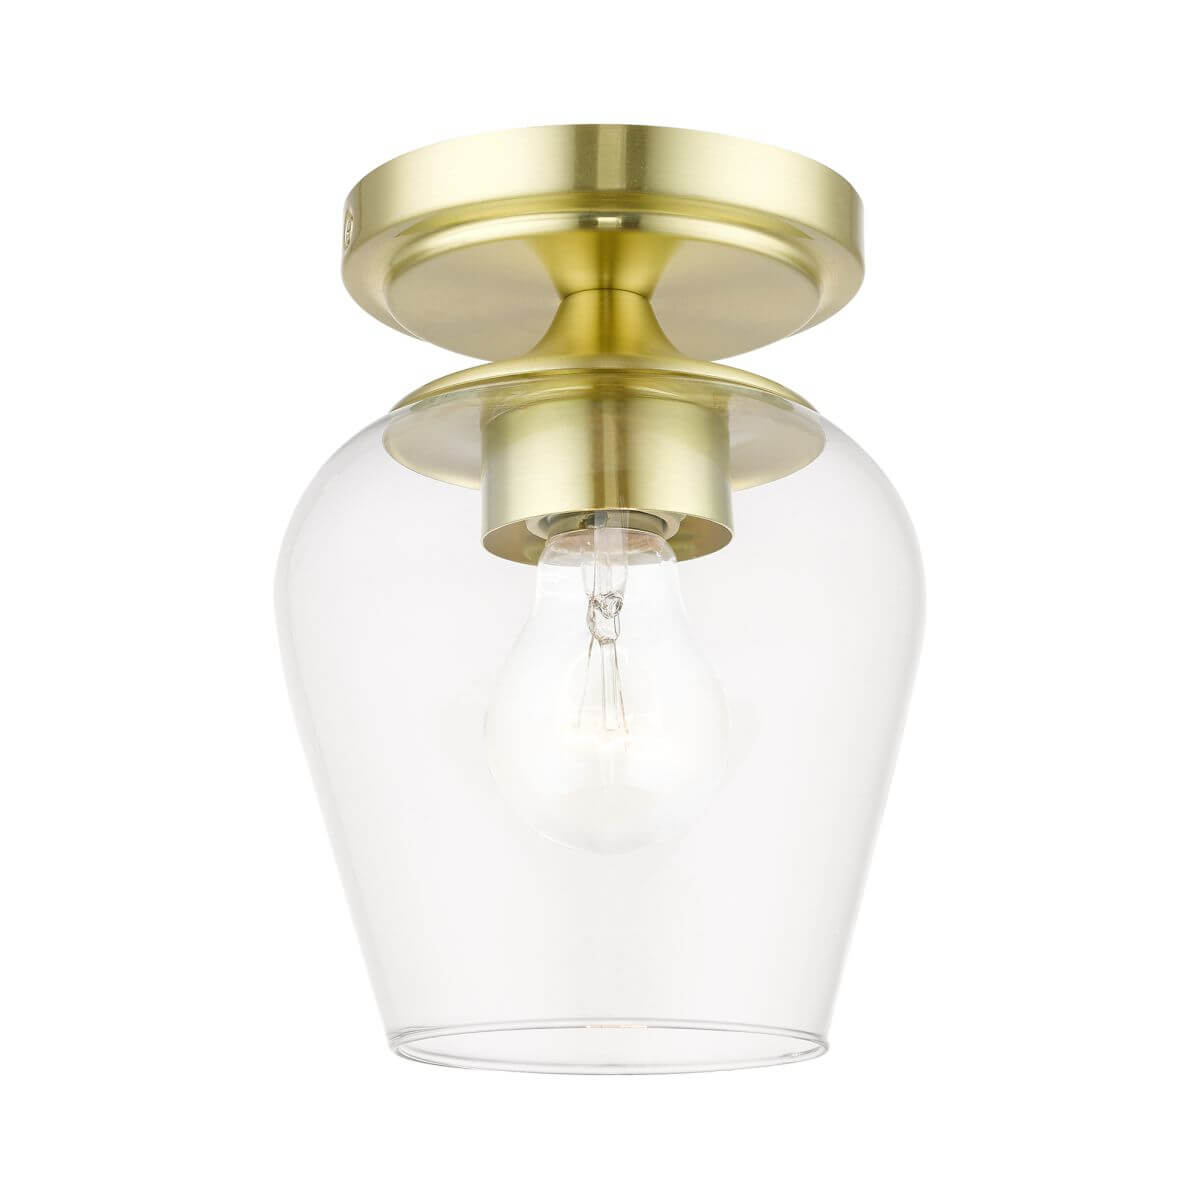 Livex 46720-12 Willow 1 Light 6 inch Flush Mount in Satin Brass with Clear Glass